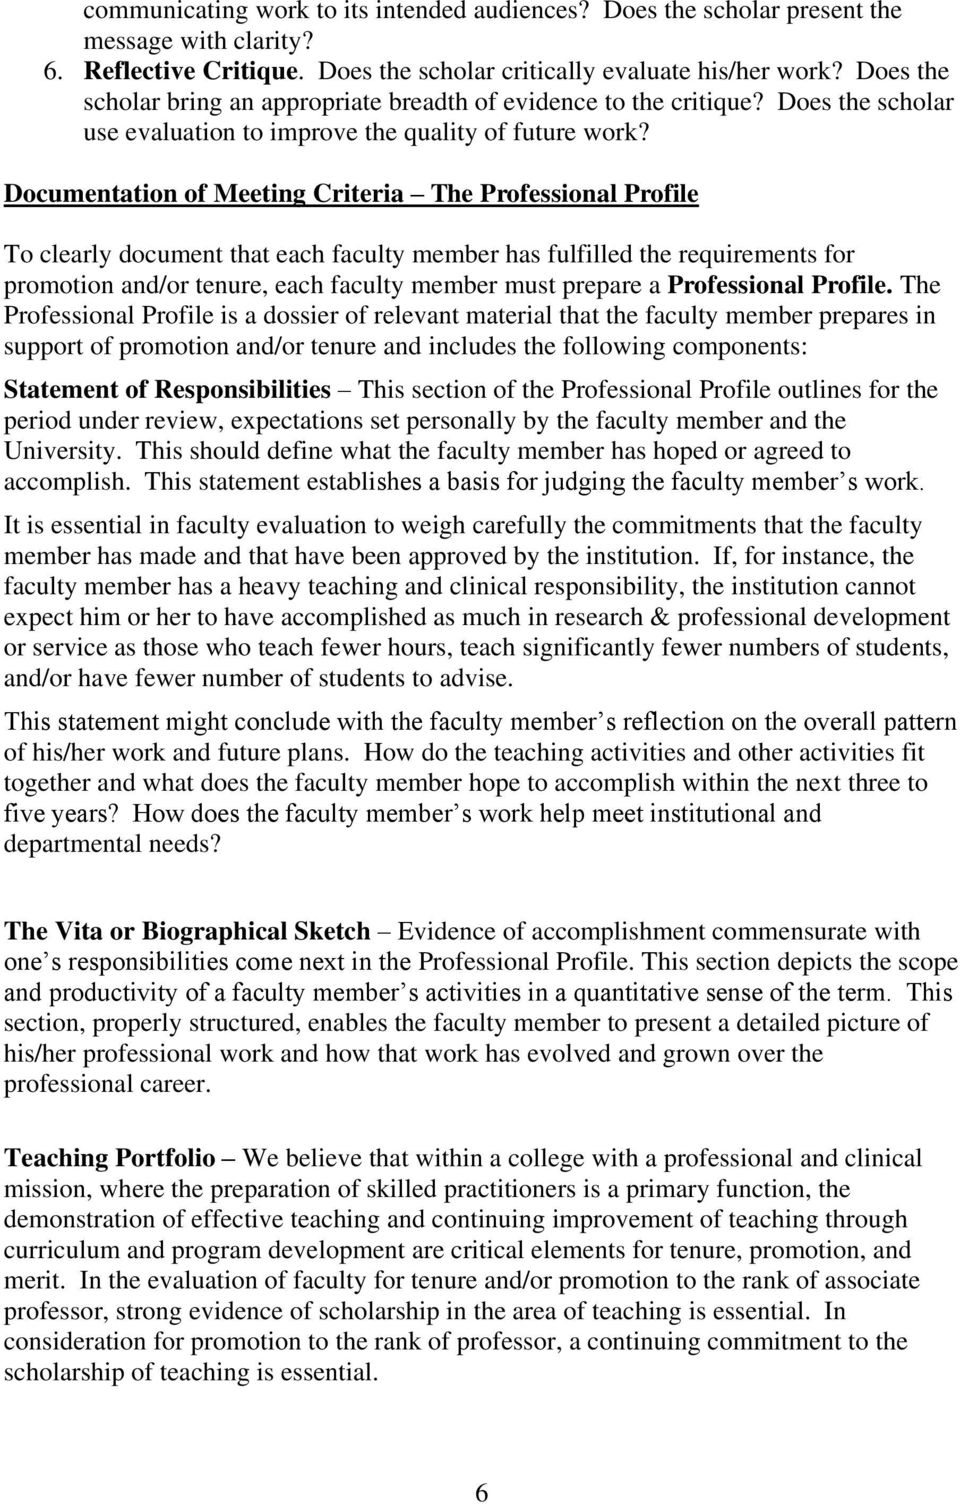 Documentation of Meeting Criteria The Professional Profile To clearly document that each faculty member has fulfilled the requirements for promotion and/or tenure, each faculty member must prepare a